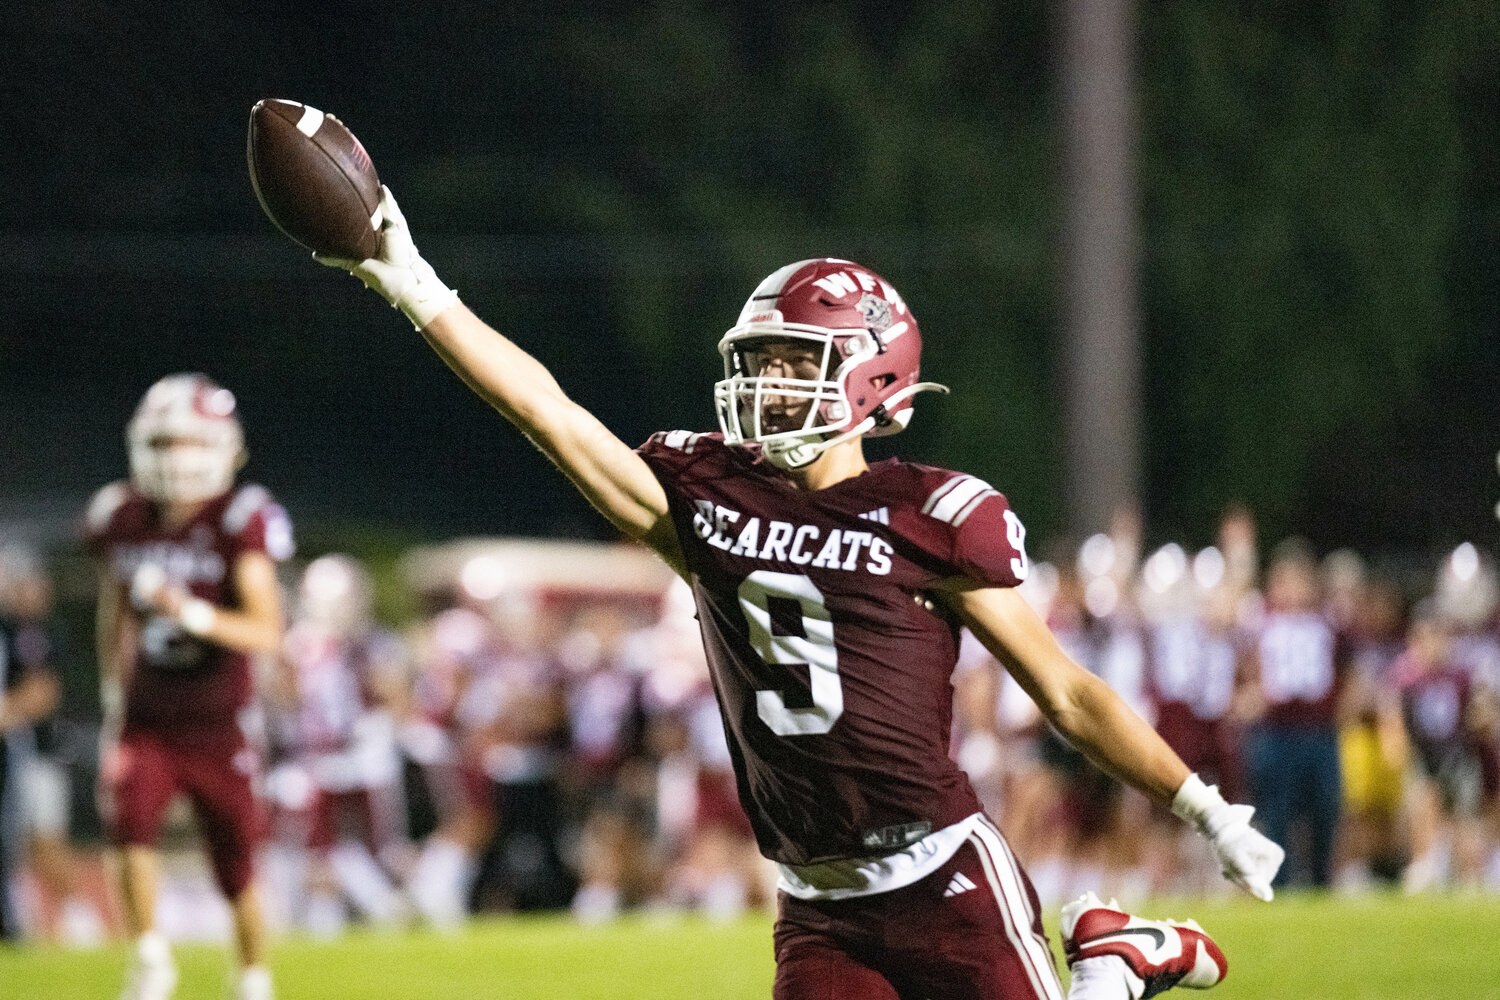 Connor Coleman celebrates his kickoff return for a touchdown during W.F. West's 27-21 loss to Ridgefield on Sept. 1.